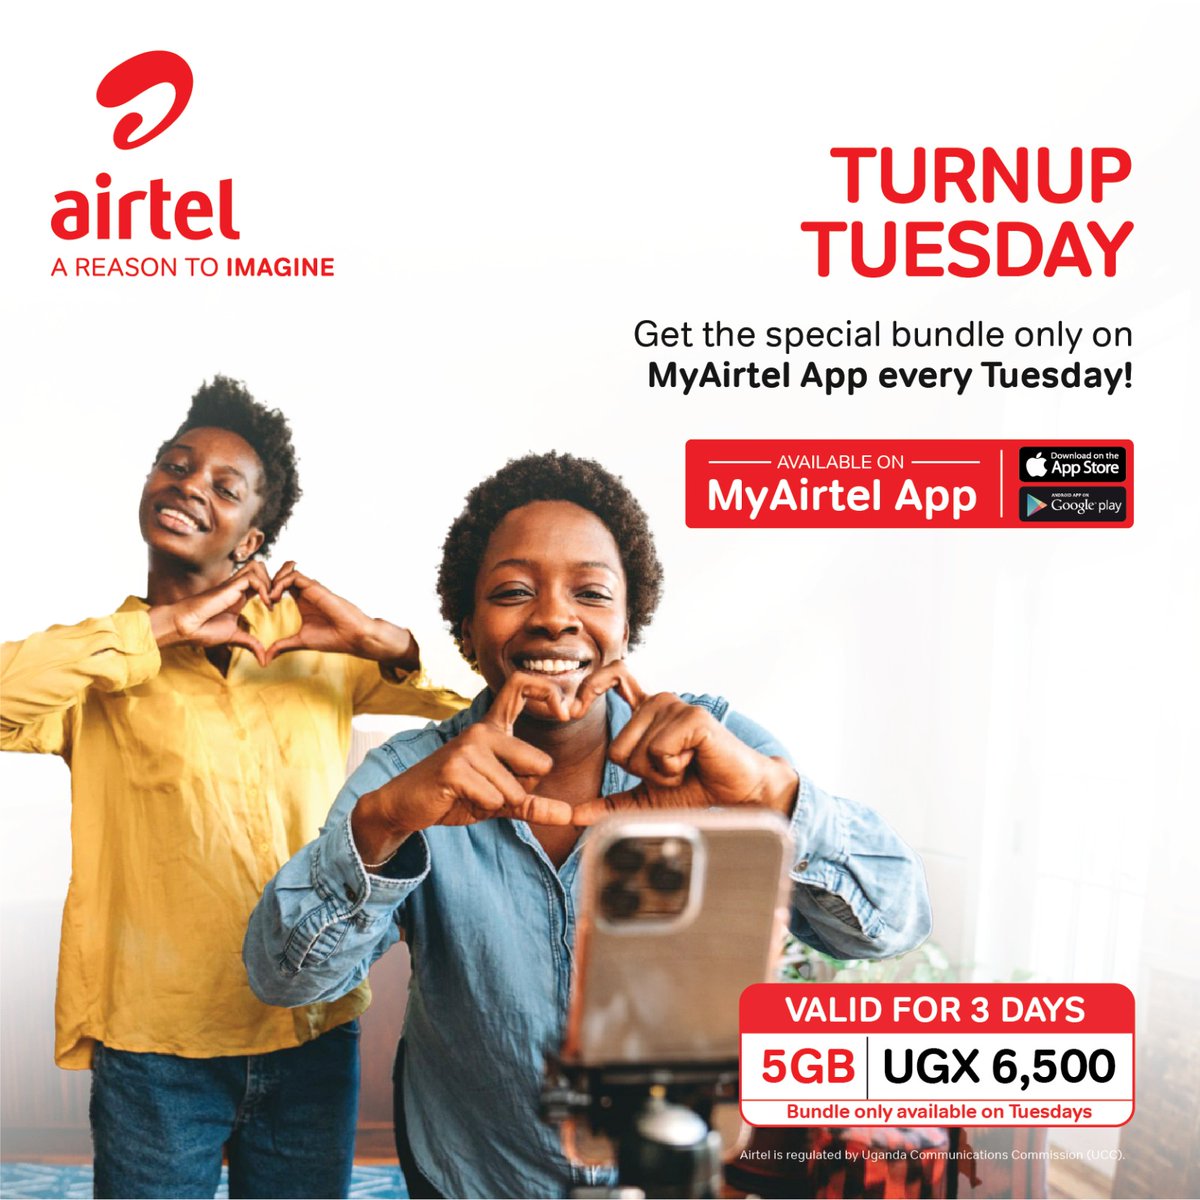 Get your Tuesday lit at only 6,500 valid for three days Download the #MyAirtelApp airtelafrica.onelink.me/cGyr/qgj4qeu2 to bundle up #TurnUpTuesday